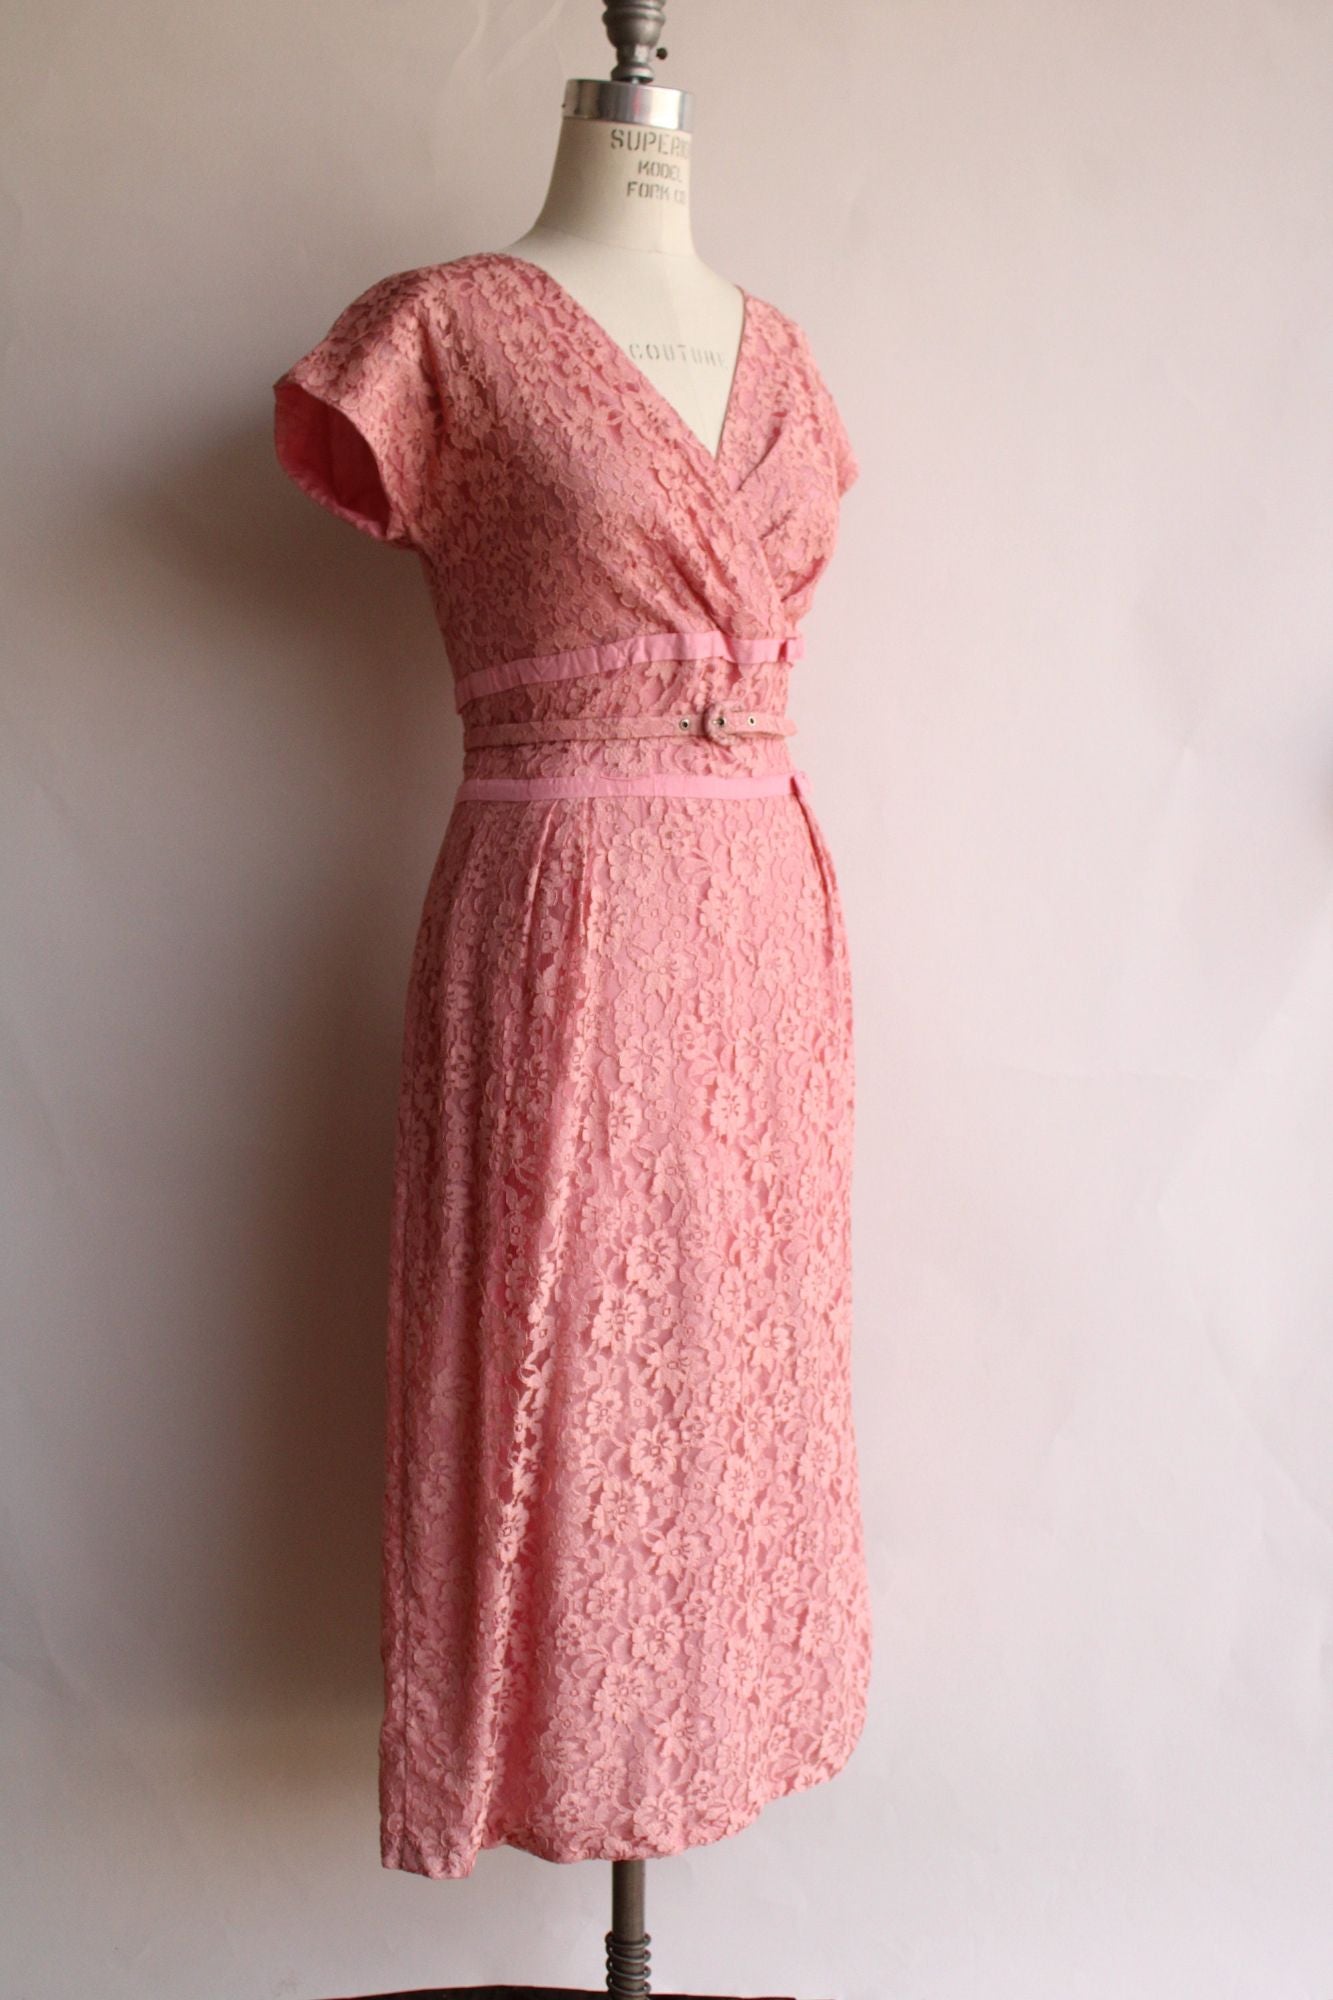 Vintage 1940s 1950s  Dress with Belt in Pink Lace